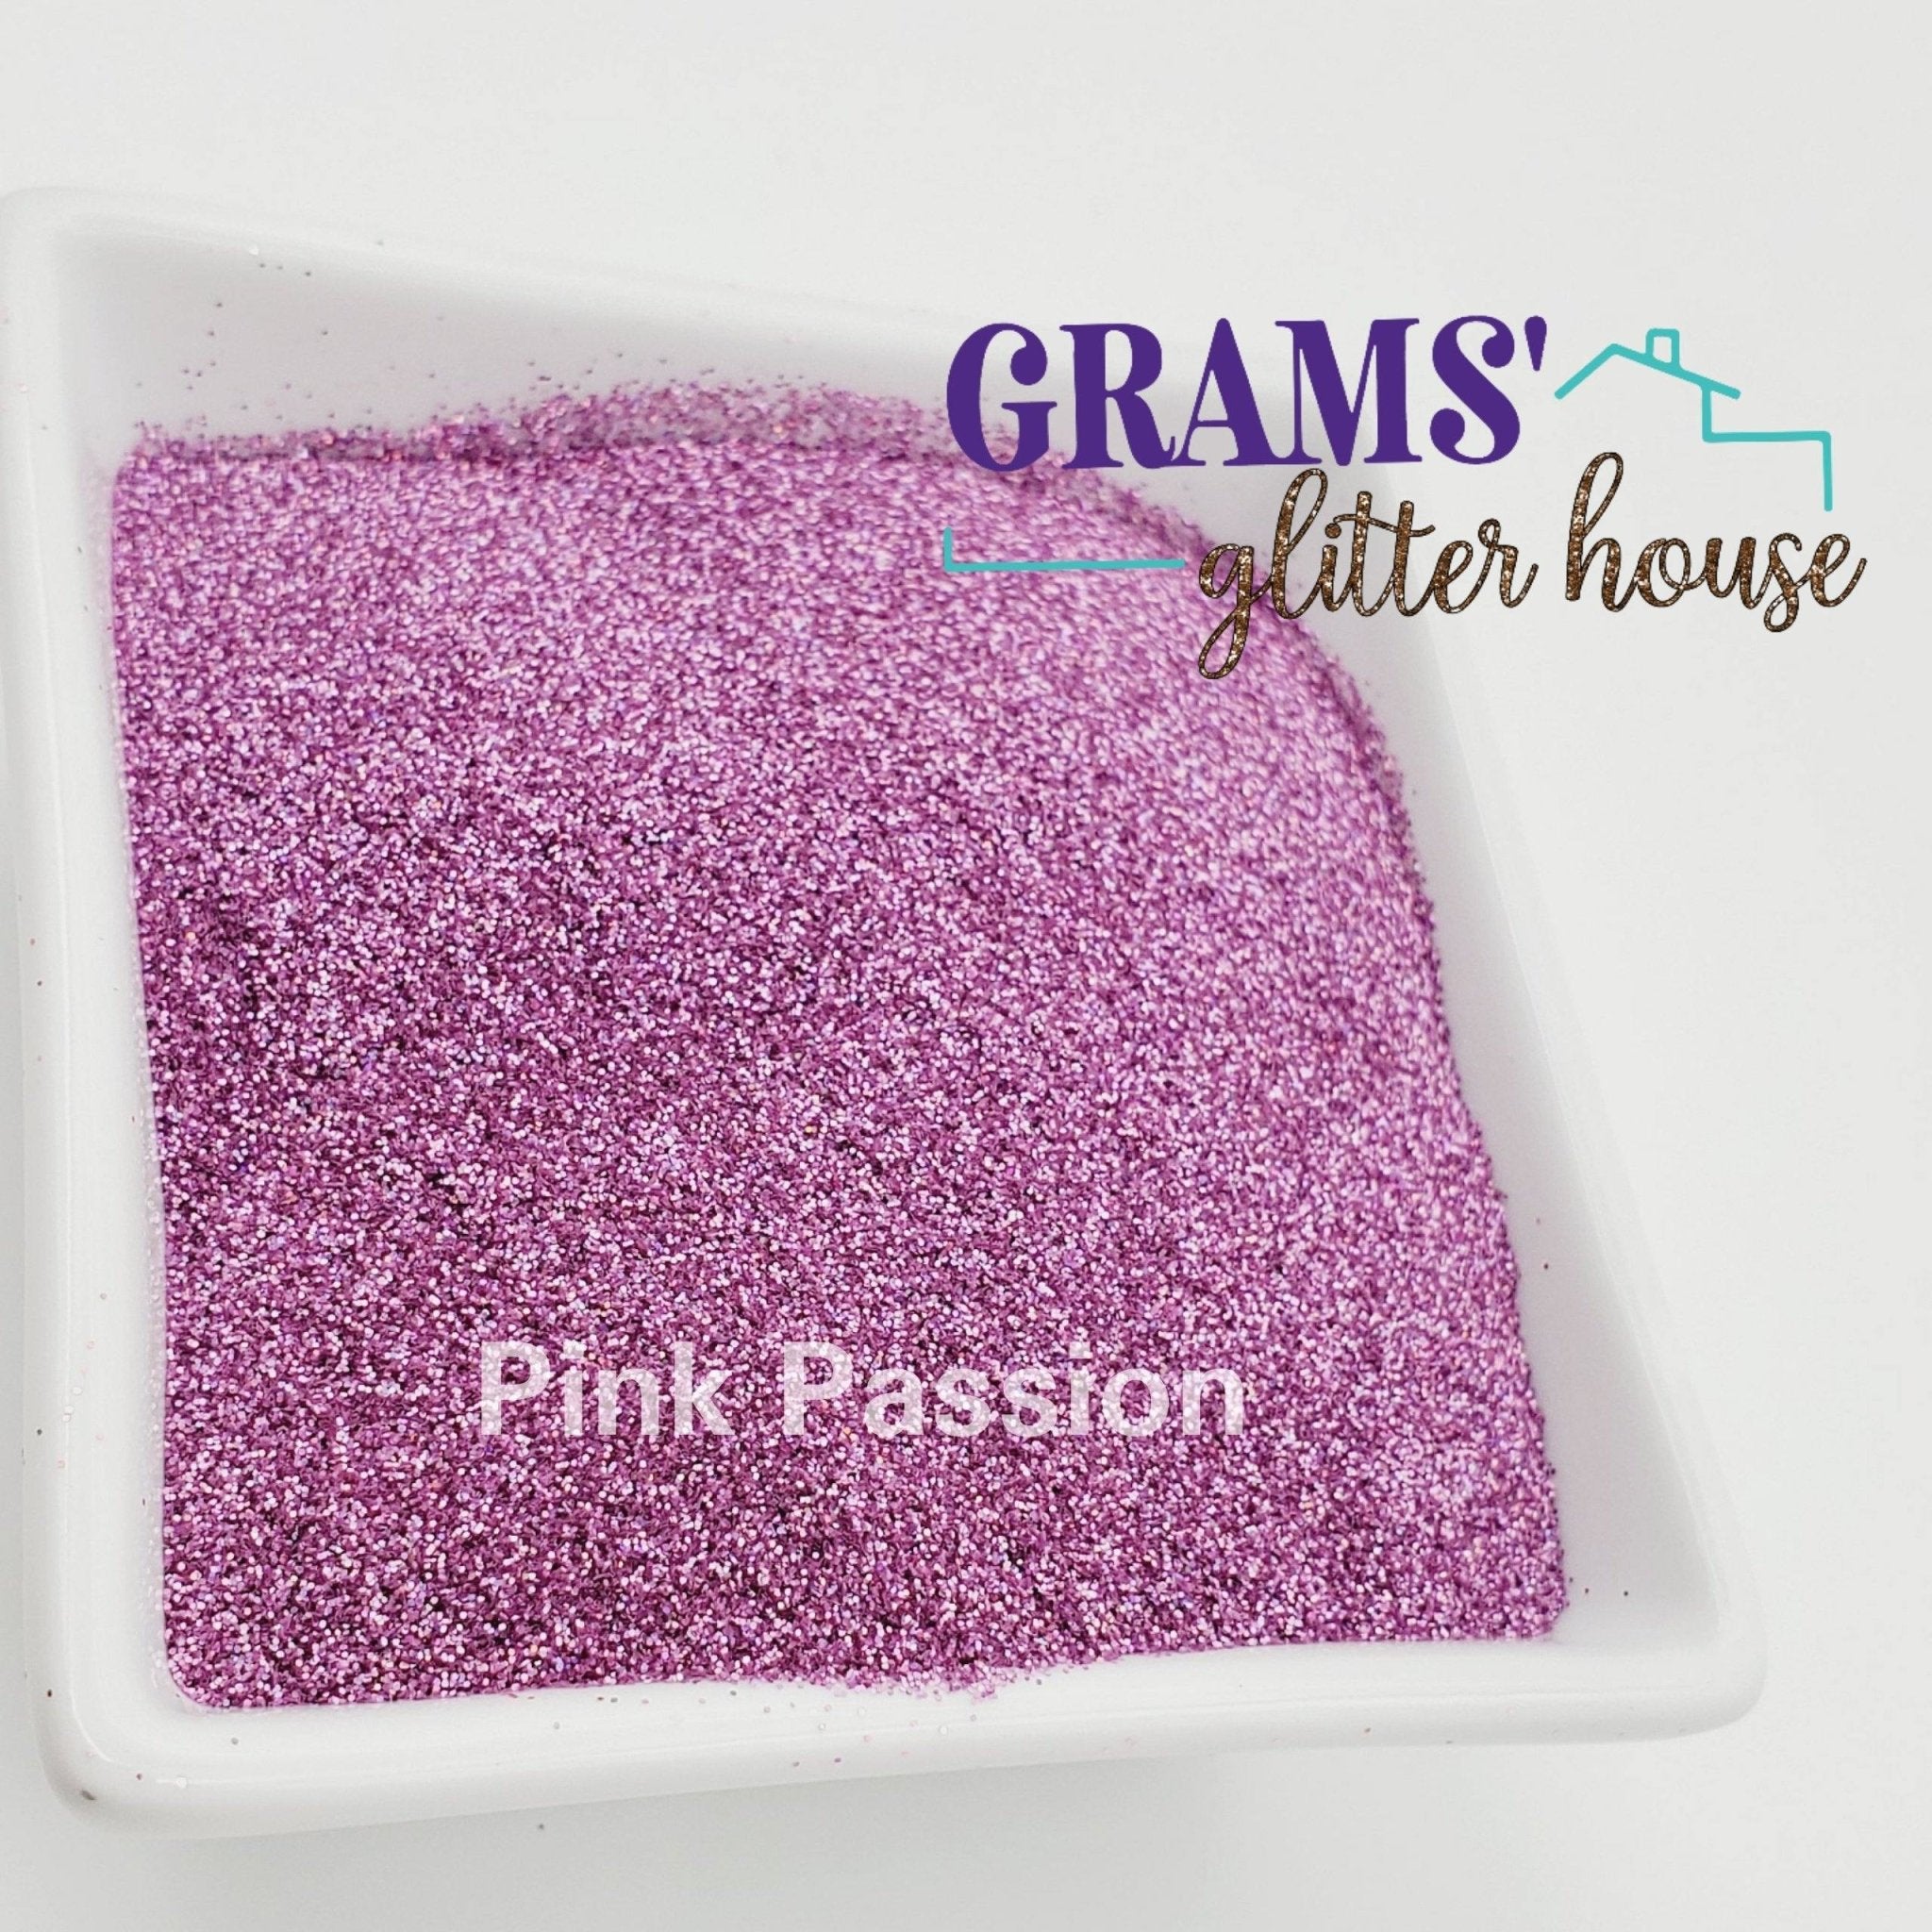 Grams' Glitter House Pink Passion Polyester Glitter